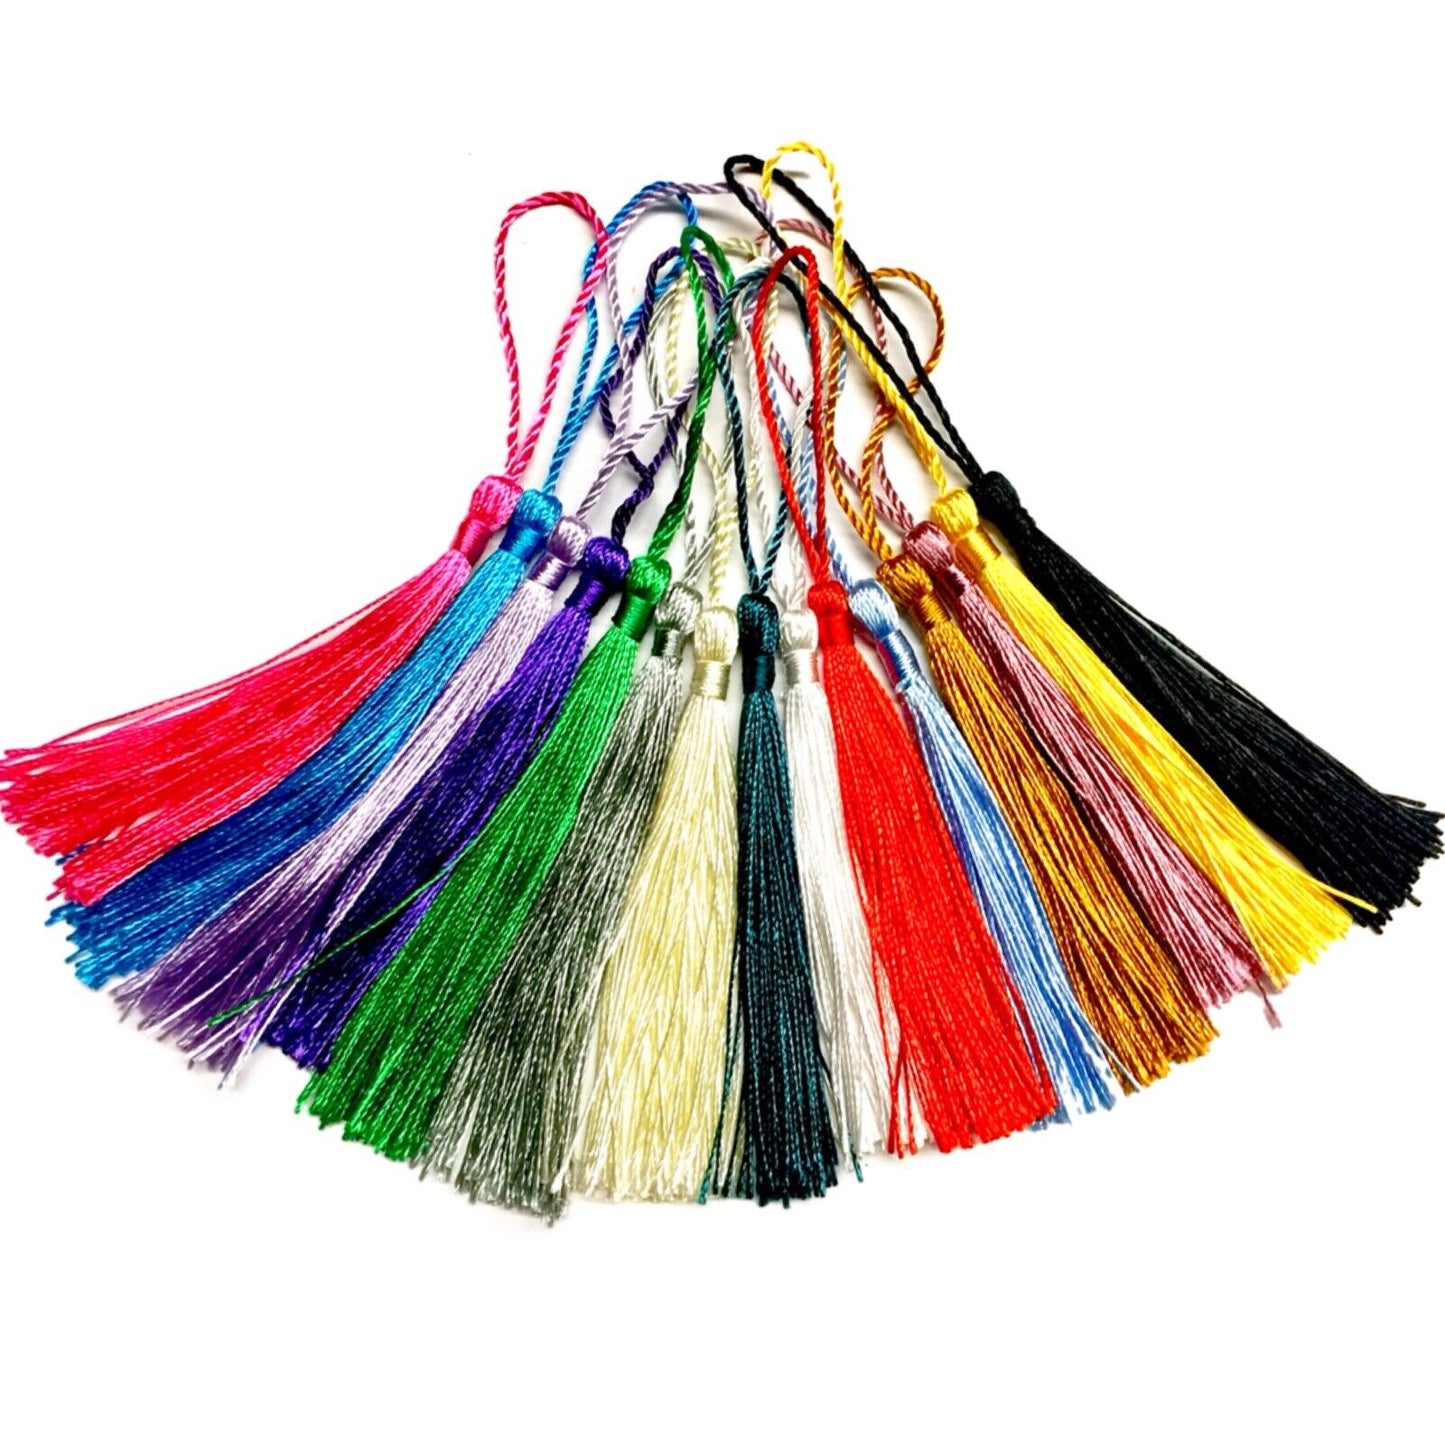 10x Satin Feel Colourful 13cm Tassels for Jewellery or Craft Making